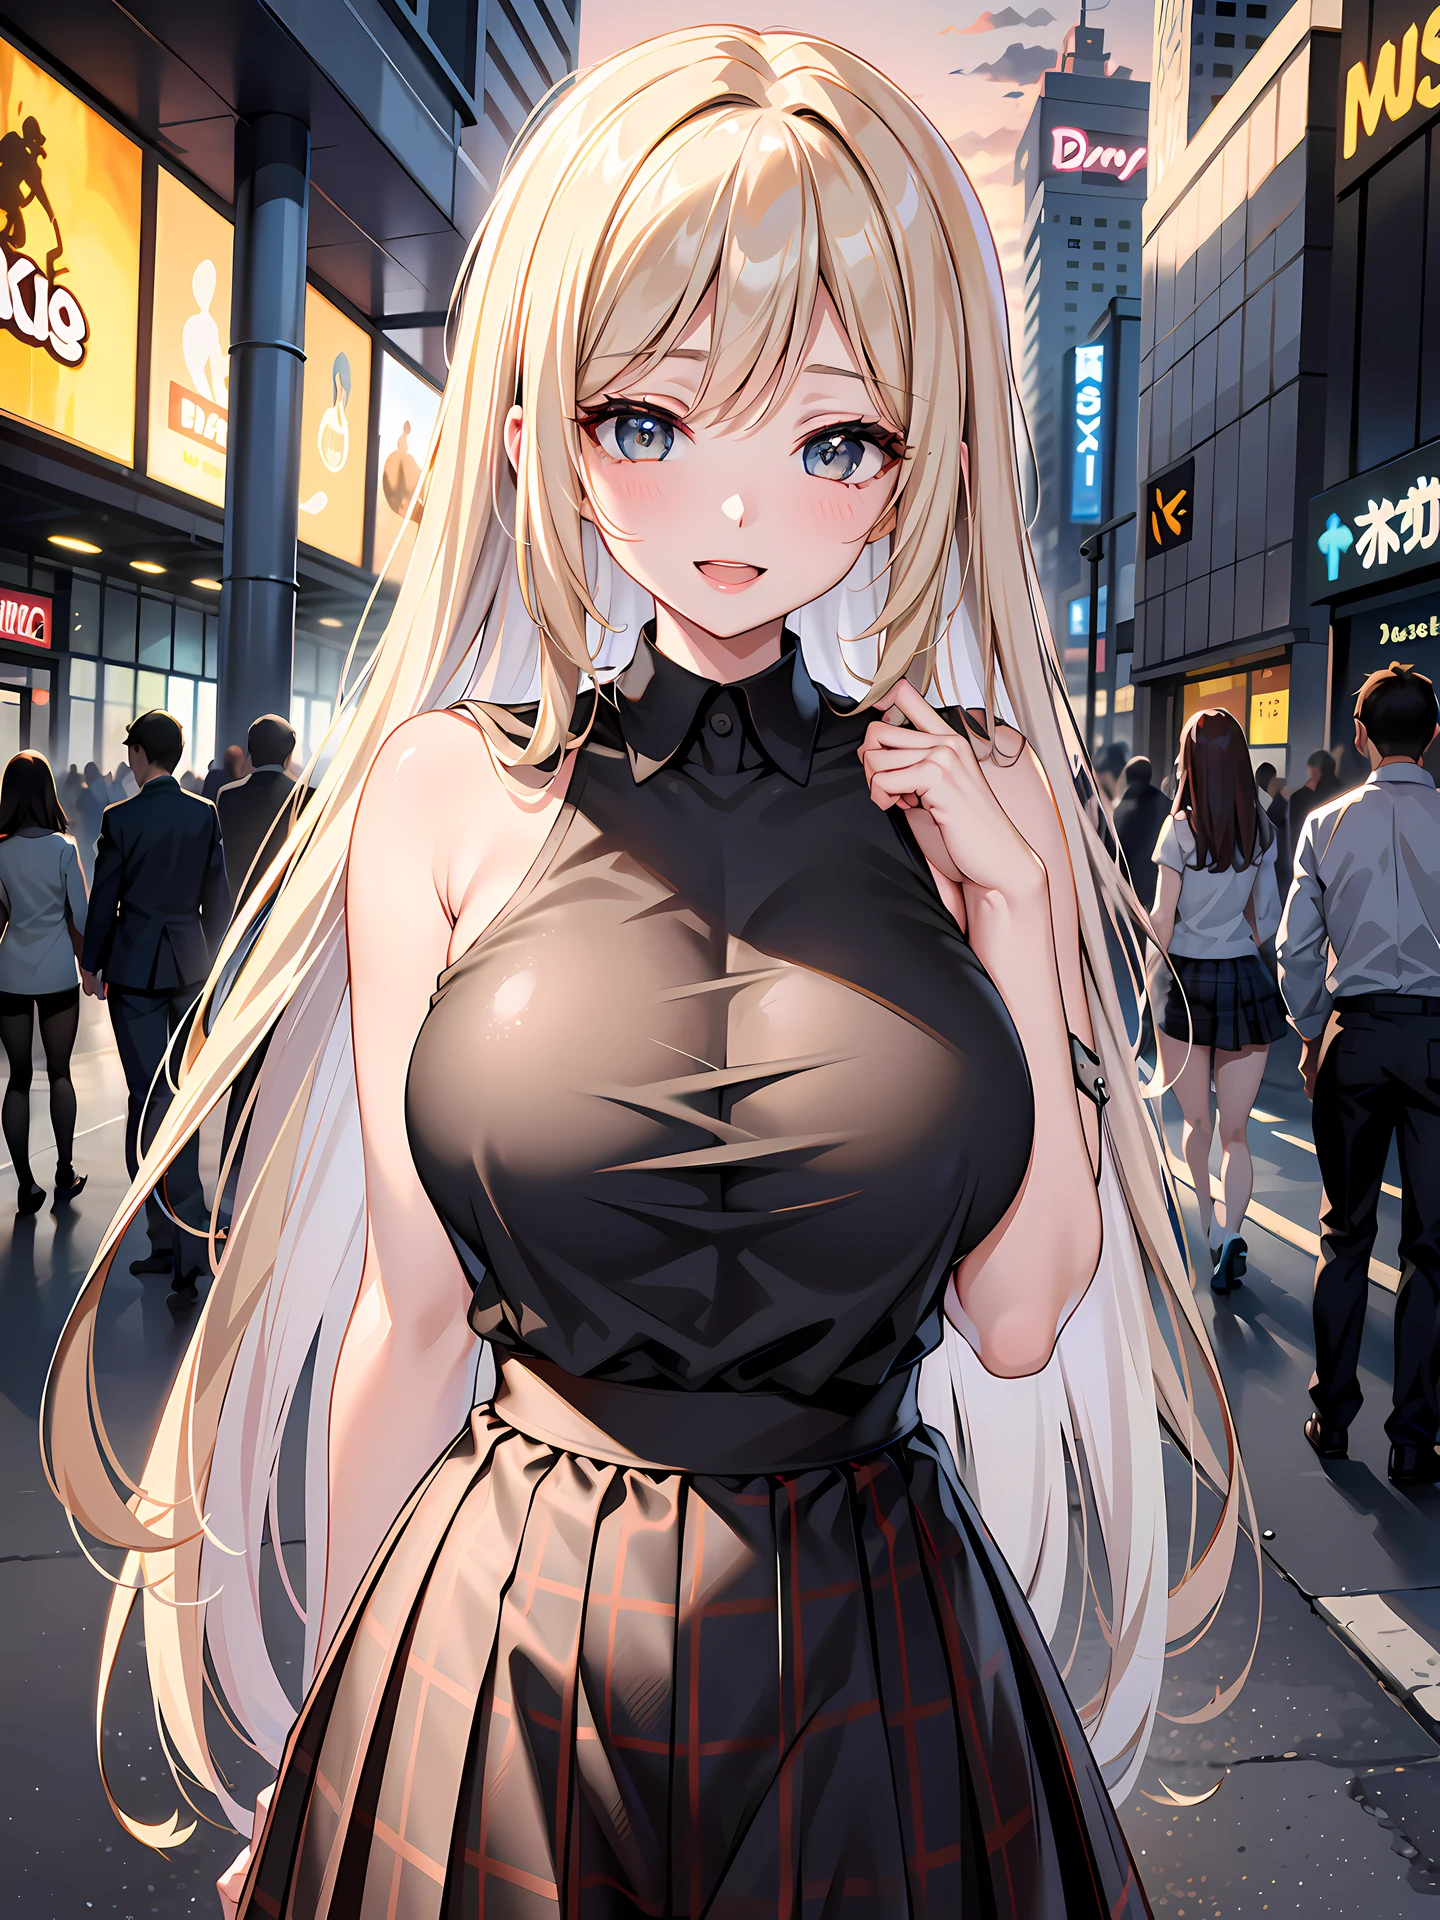 (1girl:1.3, solo), (Masterpiece, best quality, photorealistic, highres, photography, :1.3), ultra-detailed, sharp focus, professional photo, commercial photo, (upper body:1.3), (standing at downtow street), (((starring at the viewer:1.5))), (arms behind back:1.3), 
BREAK, 
1girl, solo, milf, European girl, hot model, (attractive model:1.37), (promotional model:1.2), highly detailed eyes and pupils, realistic skin, ((attractive body, gigantic breast:1.38, disproportionate breasts:1.38, thin waist:1.15)), medium-length thin hair, single braid hair, mahogany hair, extremely detailed hair, delicate sexy face, sensual gaze, shiny lips, 
BREAK, 
(dark-orange camisole:1.3), (black plaid-pattern-skirt:1.3), detailed clothes, 
BREAK, 
(outdoor, Times Square garden background, blurry background:1.25, simple background, no-human background, detailed background), (under sunset:1.37), 
BREAK, 
(attractive posing), ((realistic, super realistic, realism, realistic detail)), perfect anatomy, perfect proportion, bokeh, depth of field, hyper sharp image, (attractive emotion, seductive smile:1.2, happy:1.2, blush:1.2, :d:1.2, :p:1.2), 4fingers and thumb, perfect human hands, wind,